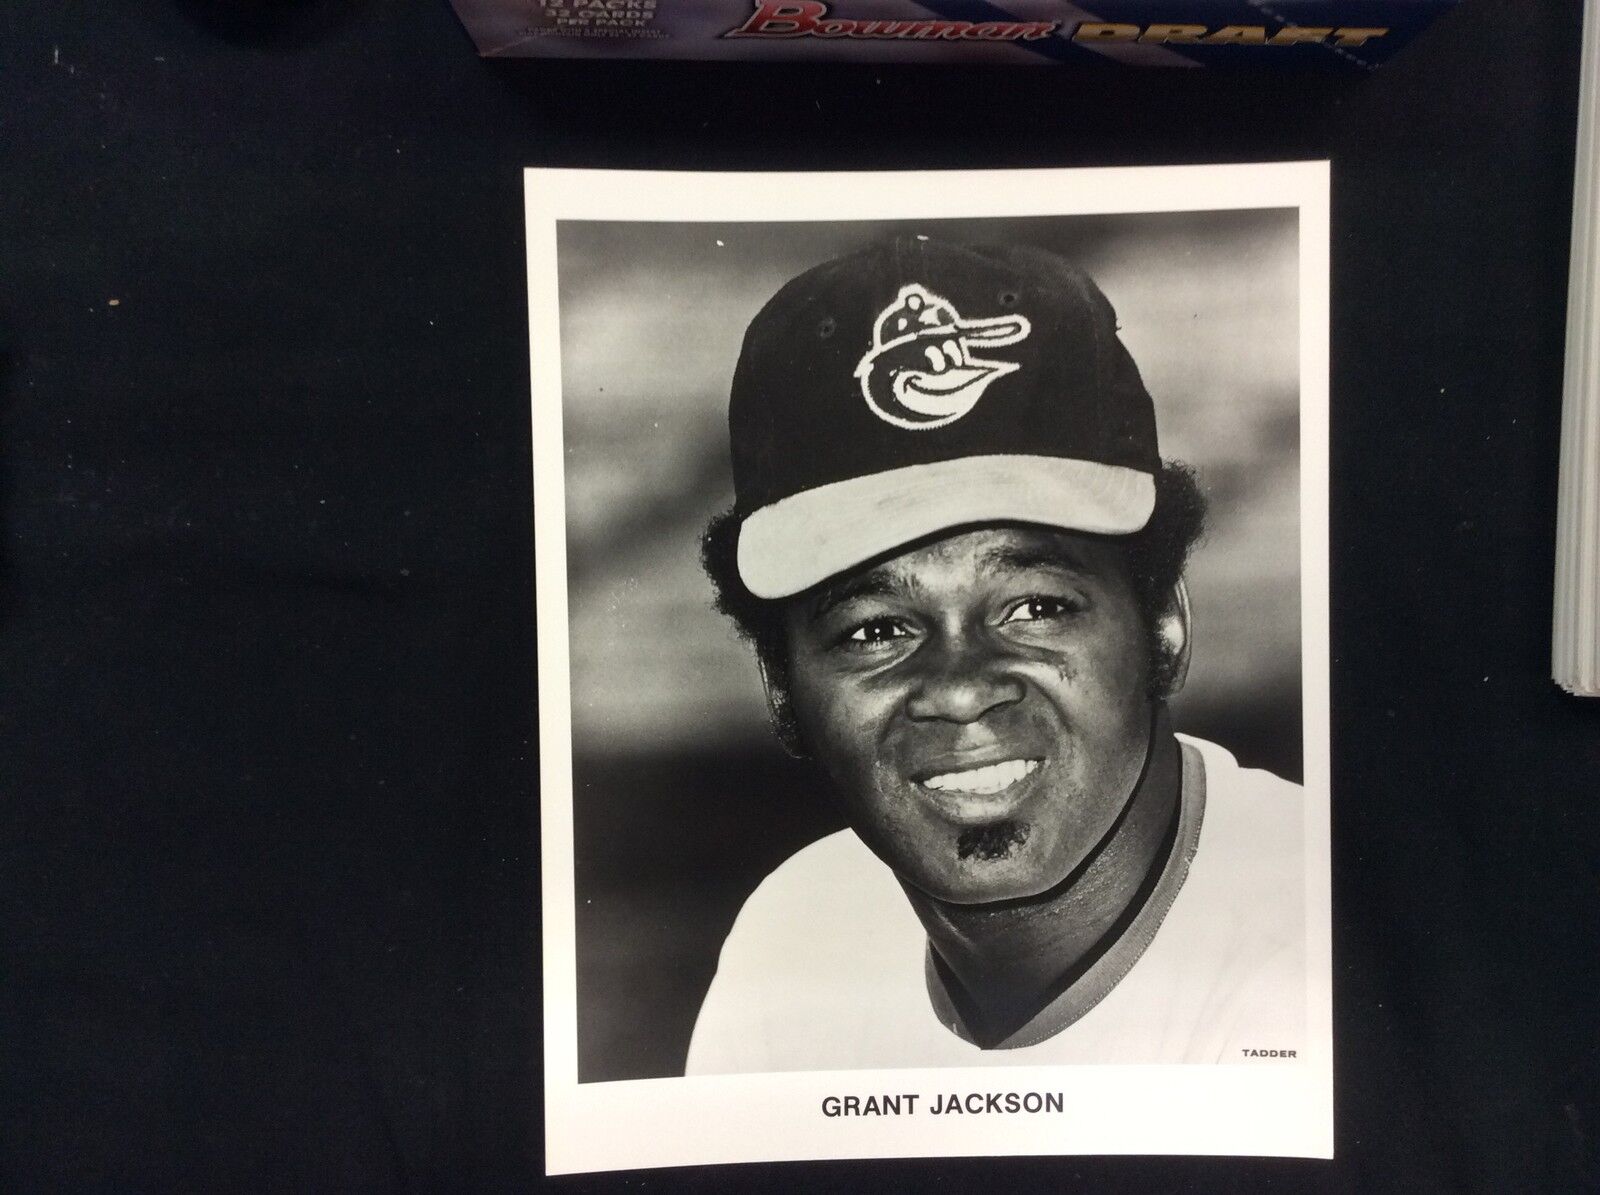 Grant Jackson Baltimore Orioles 8x10 B&W photo Tadder Team Issued photo